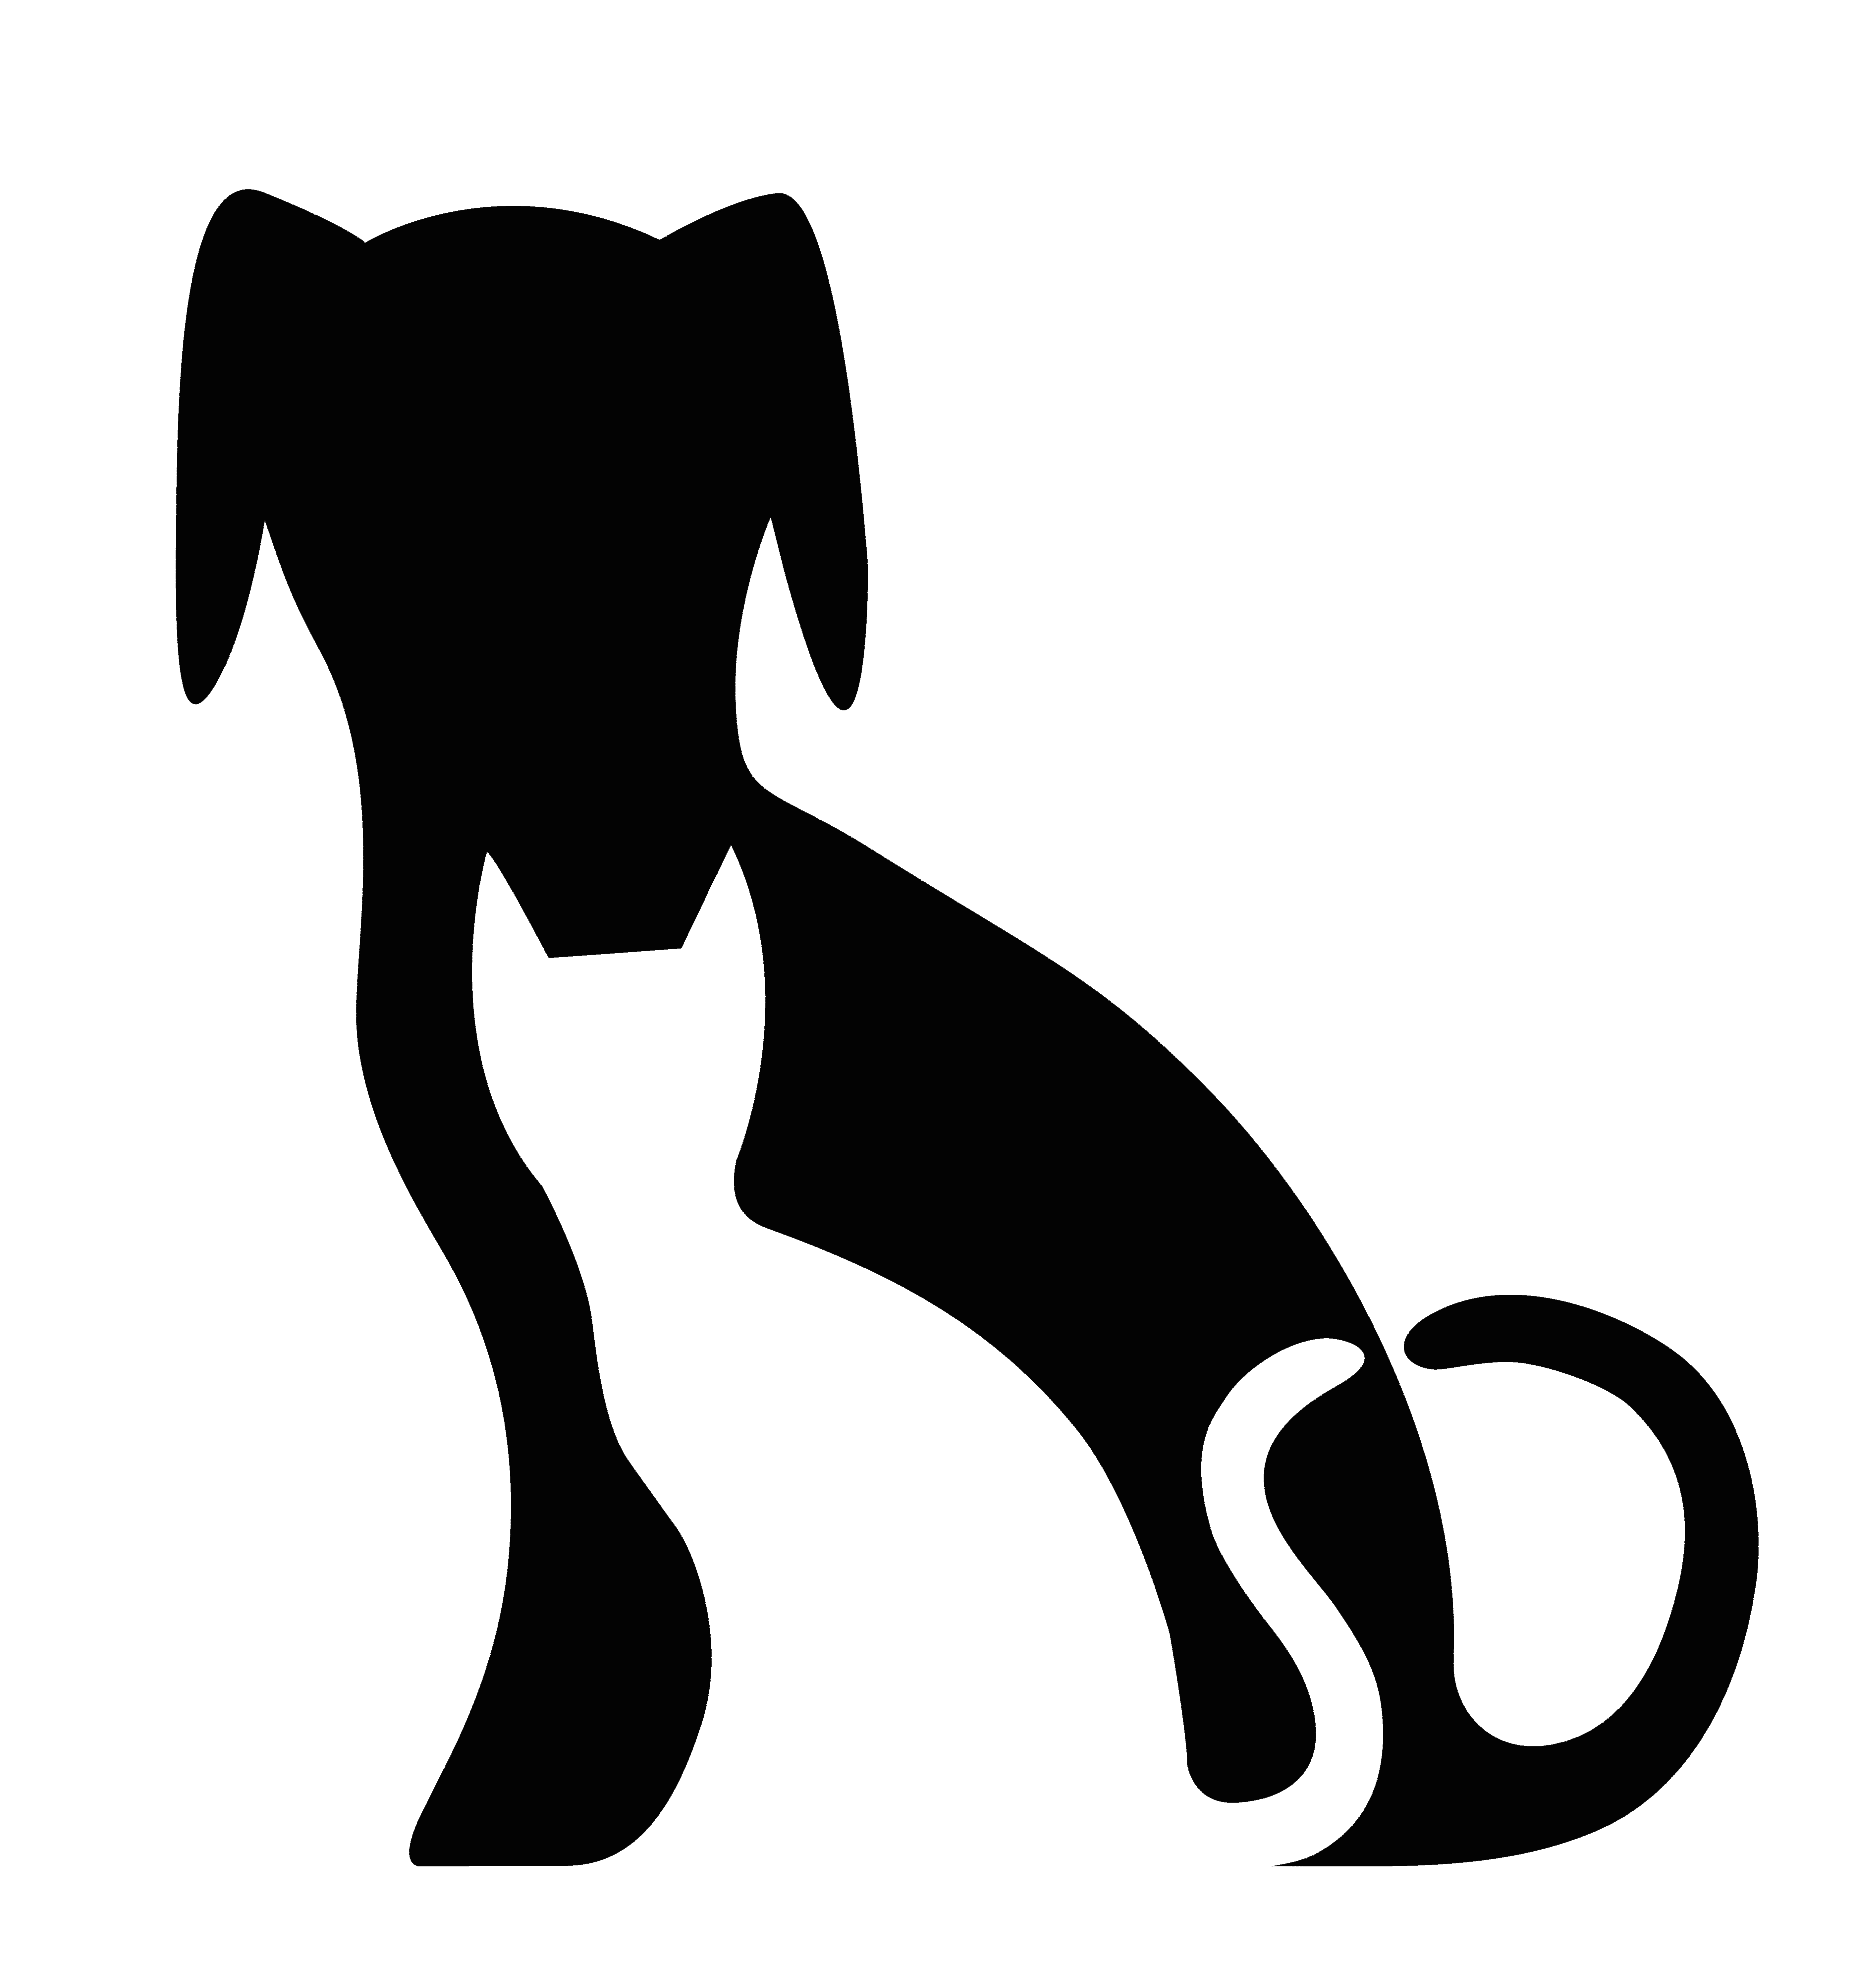 Veterinarian clipart black and white. Town center animal clinic